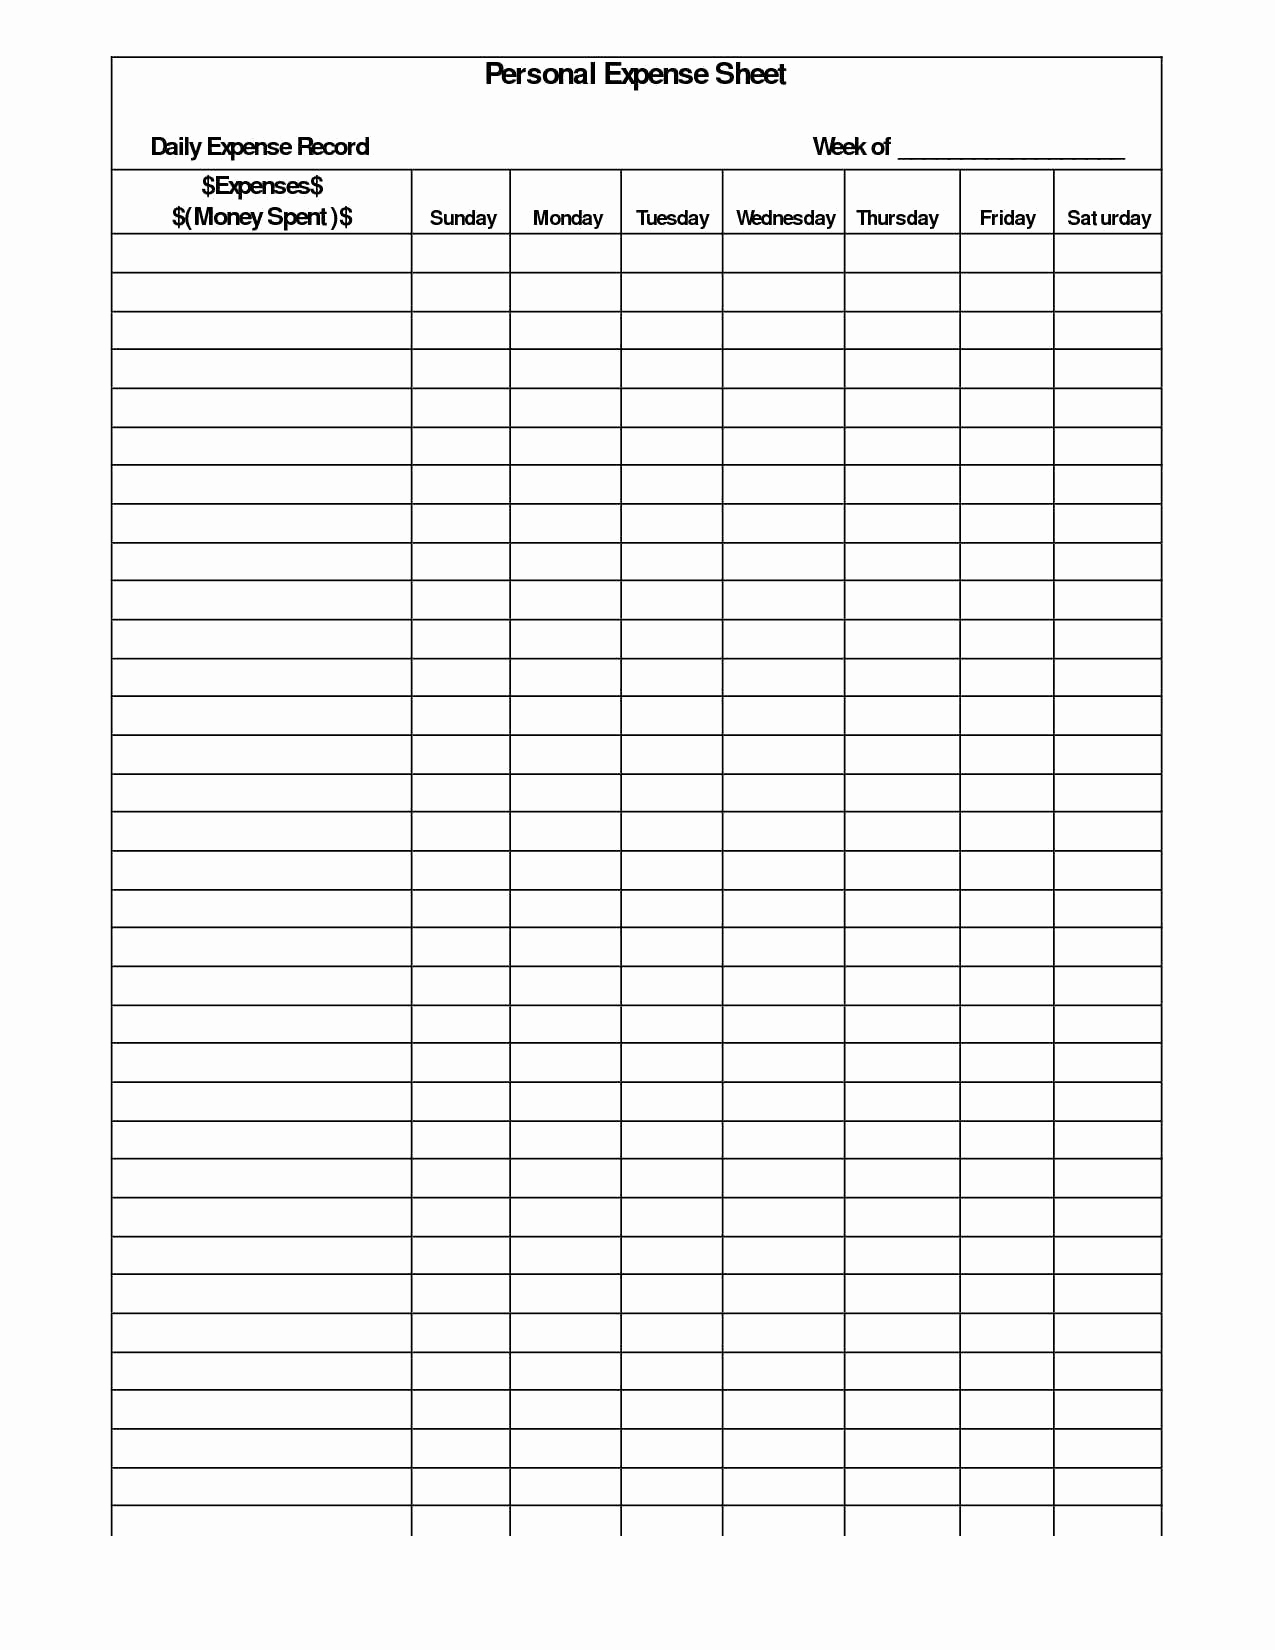 worksheets to track daily expenses